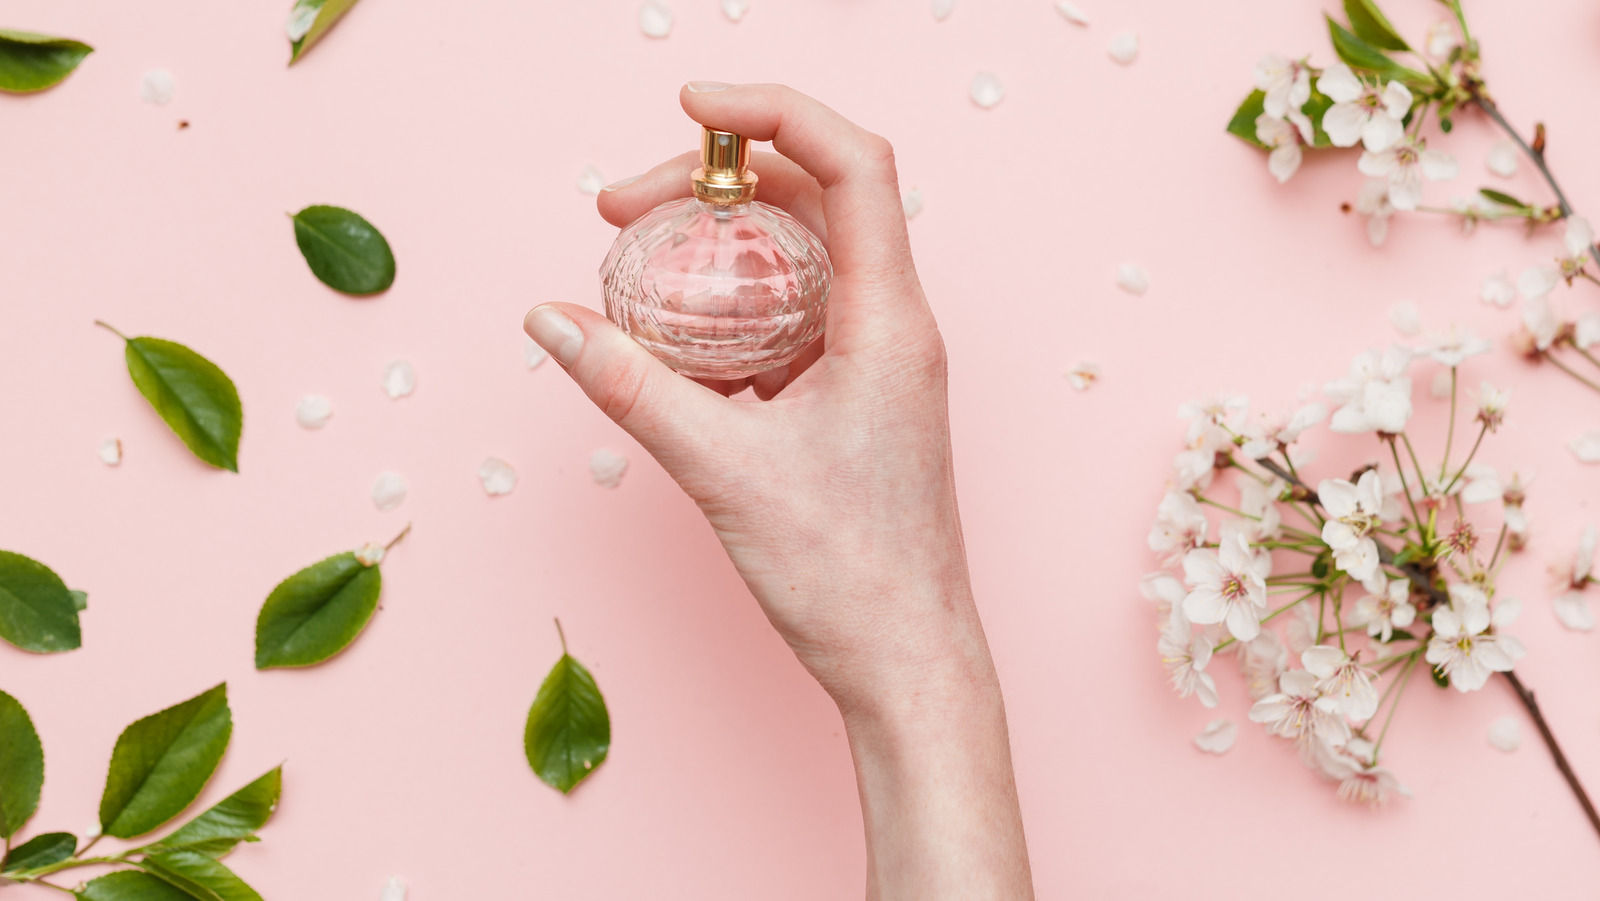 Spring's Best Perfumes Are an Intoxicating Study on Memory and Scent